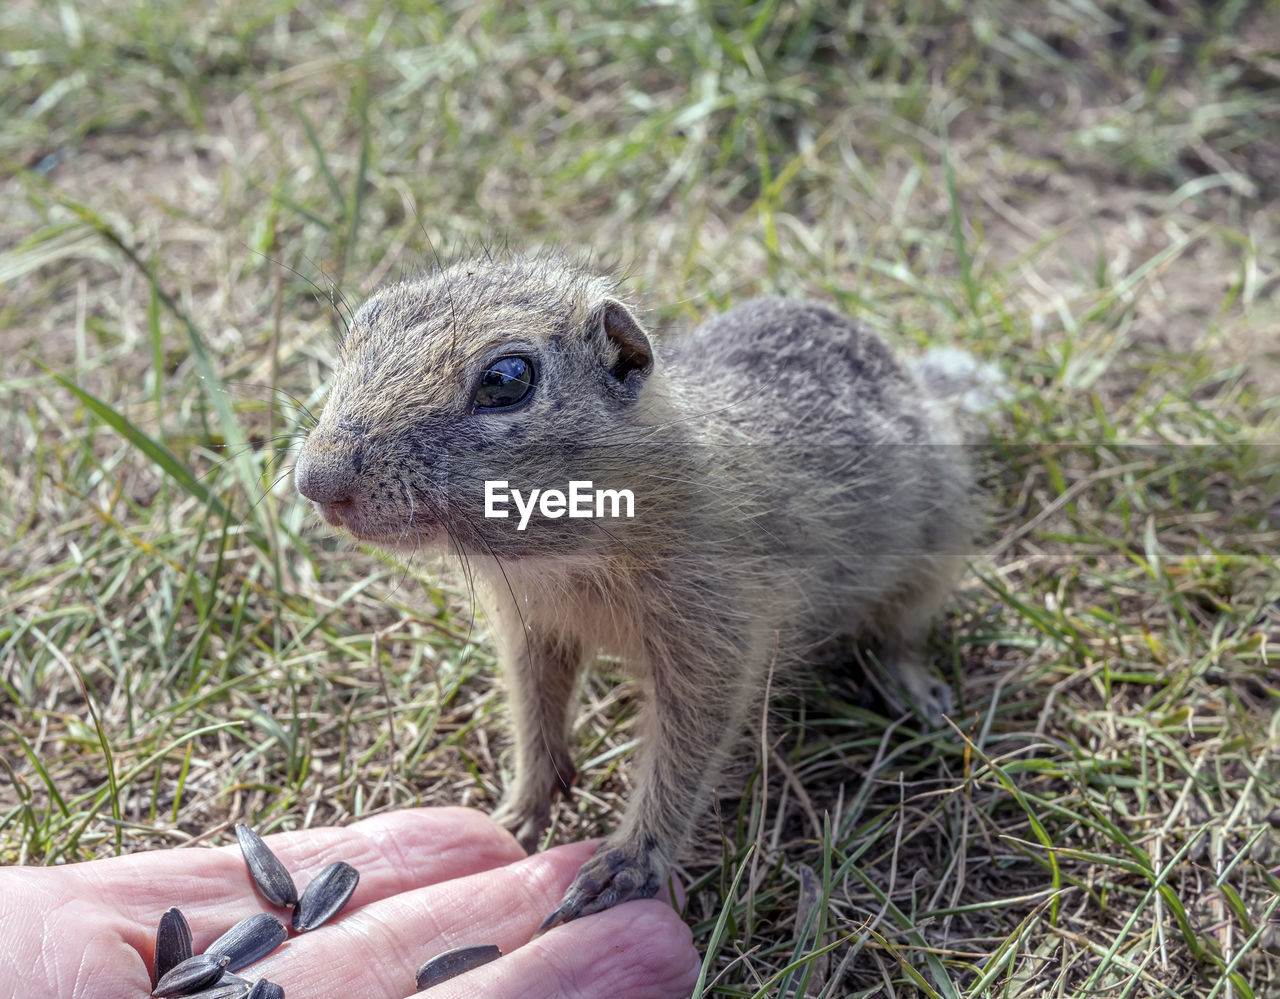 animal themes, animal, animal wildlife, one animal, hand, wildlife, mammal, rodent, holding, squirrel, one person, close-up, whiskers, grass, day, nature, eating, focus on foreground, outdoors, plant, finger